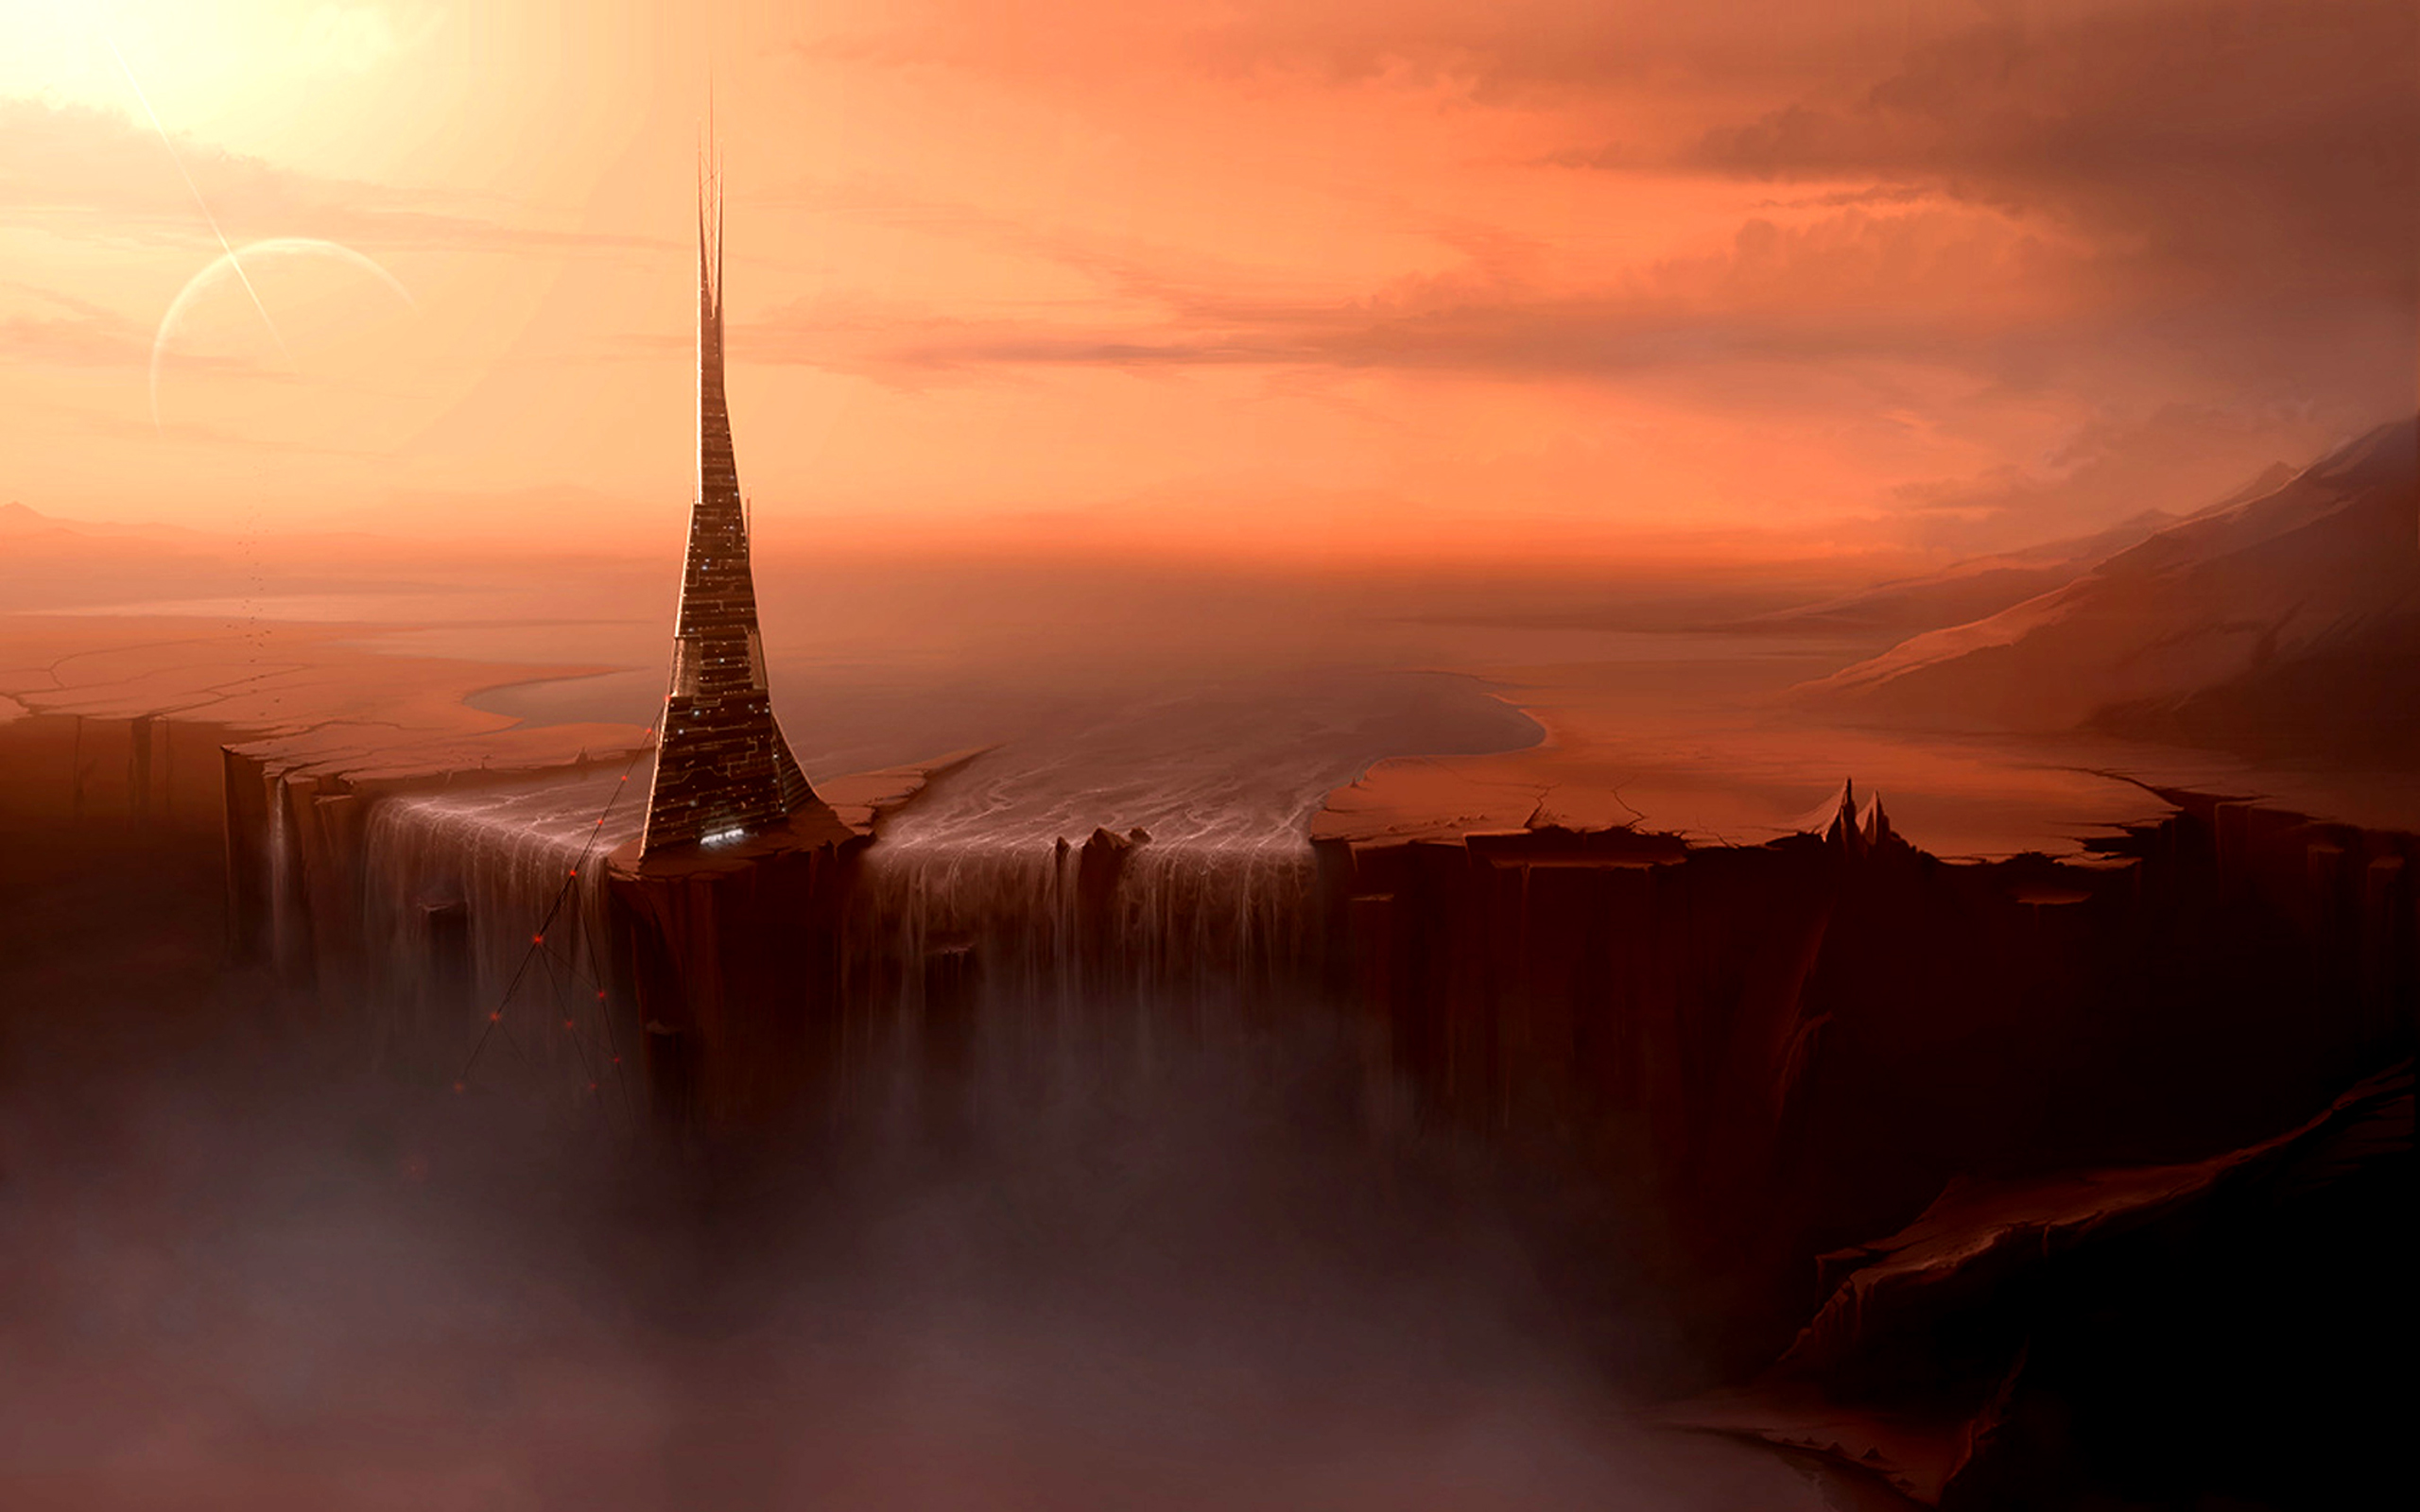 Fantasy landscape featuring a tower on the edge